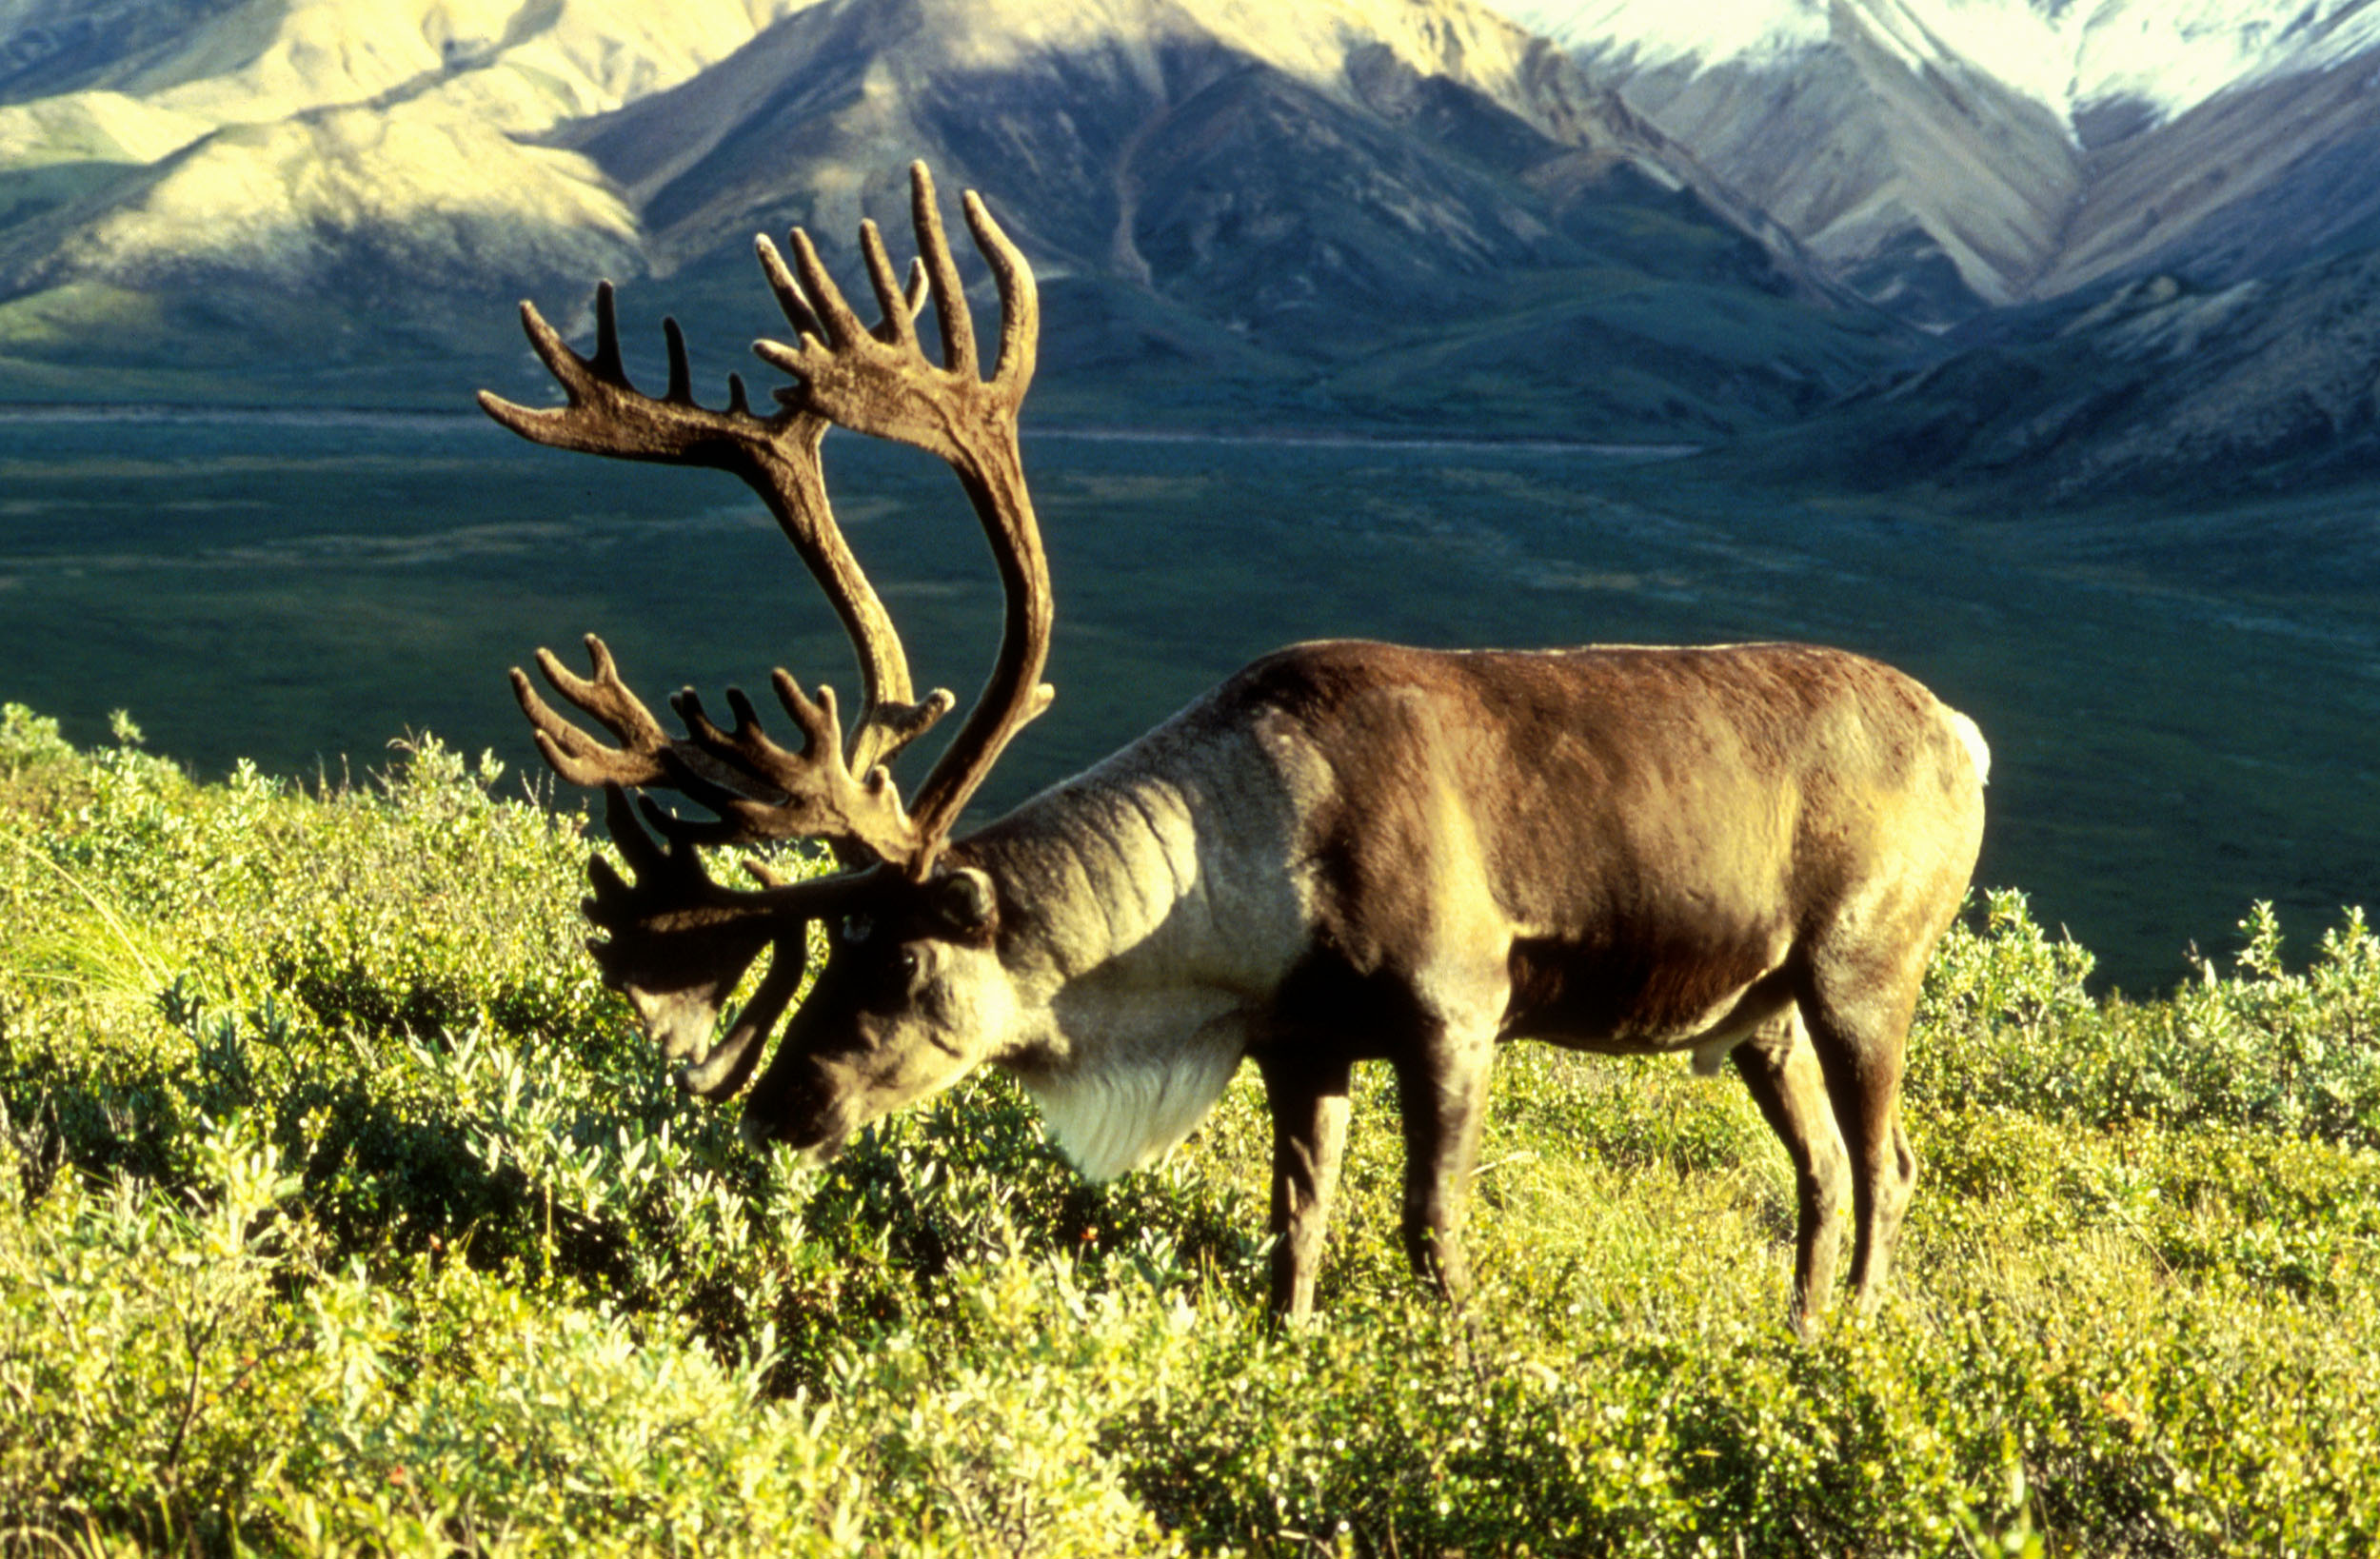 Caribou in the wild eating grass